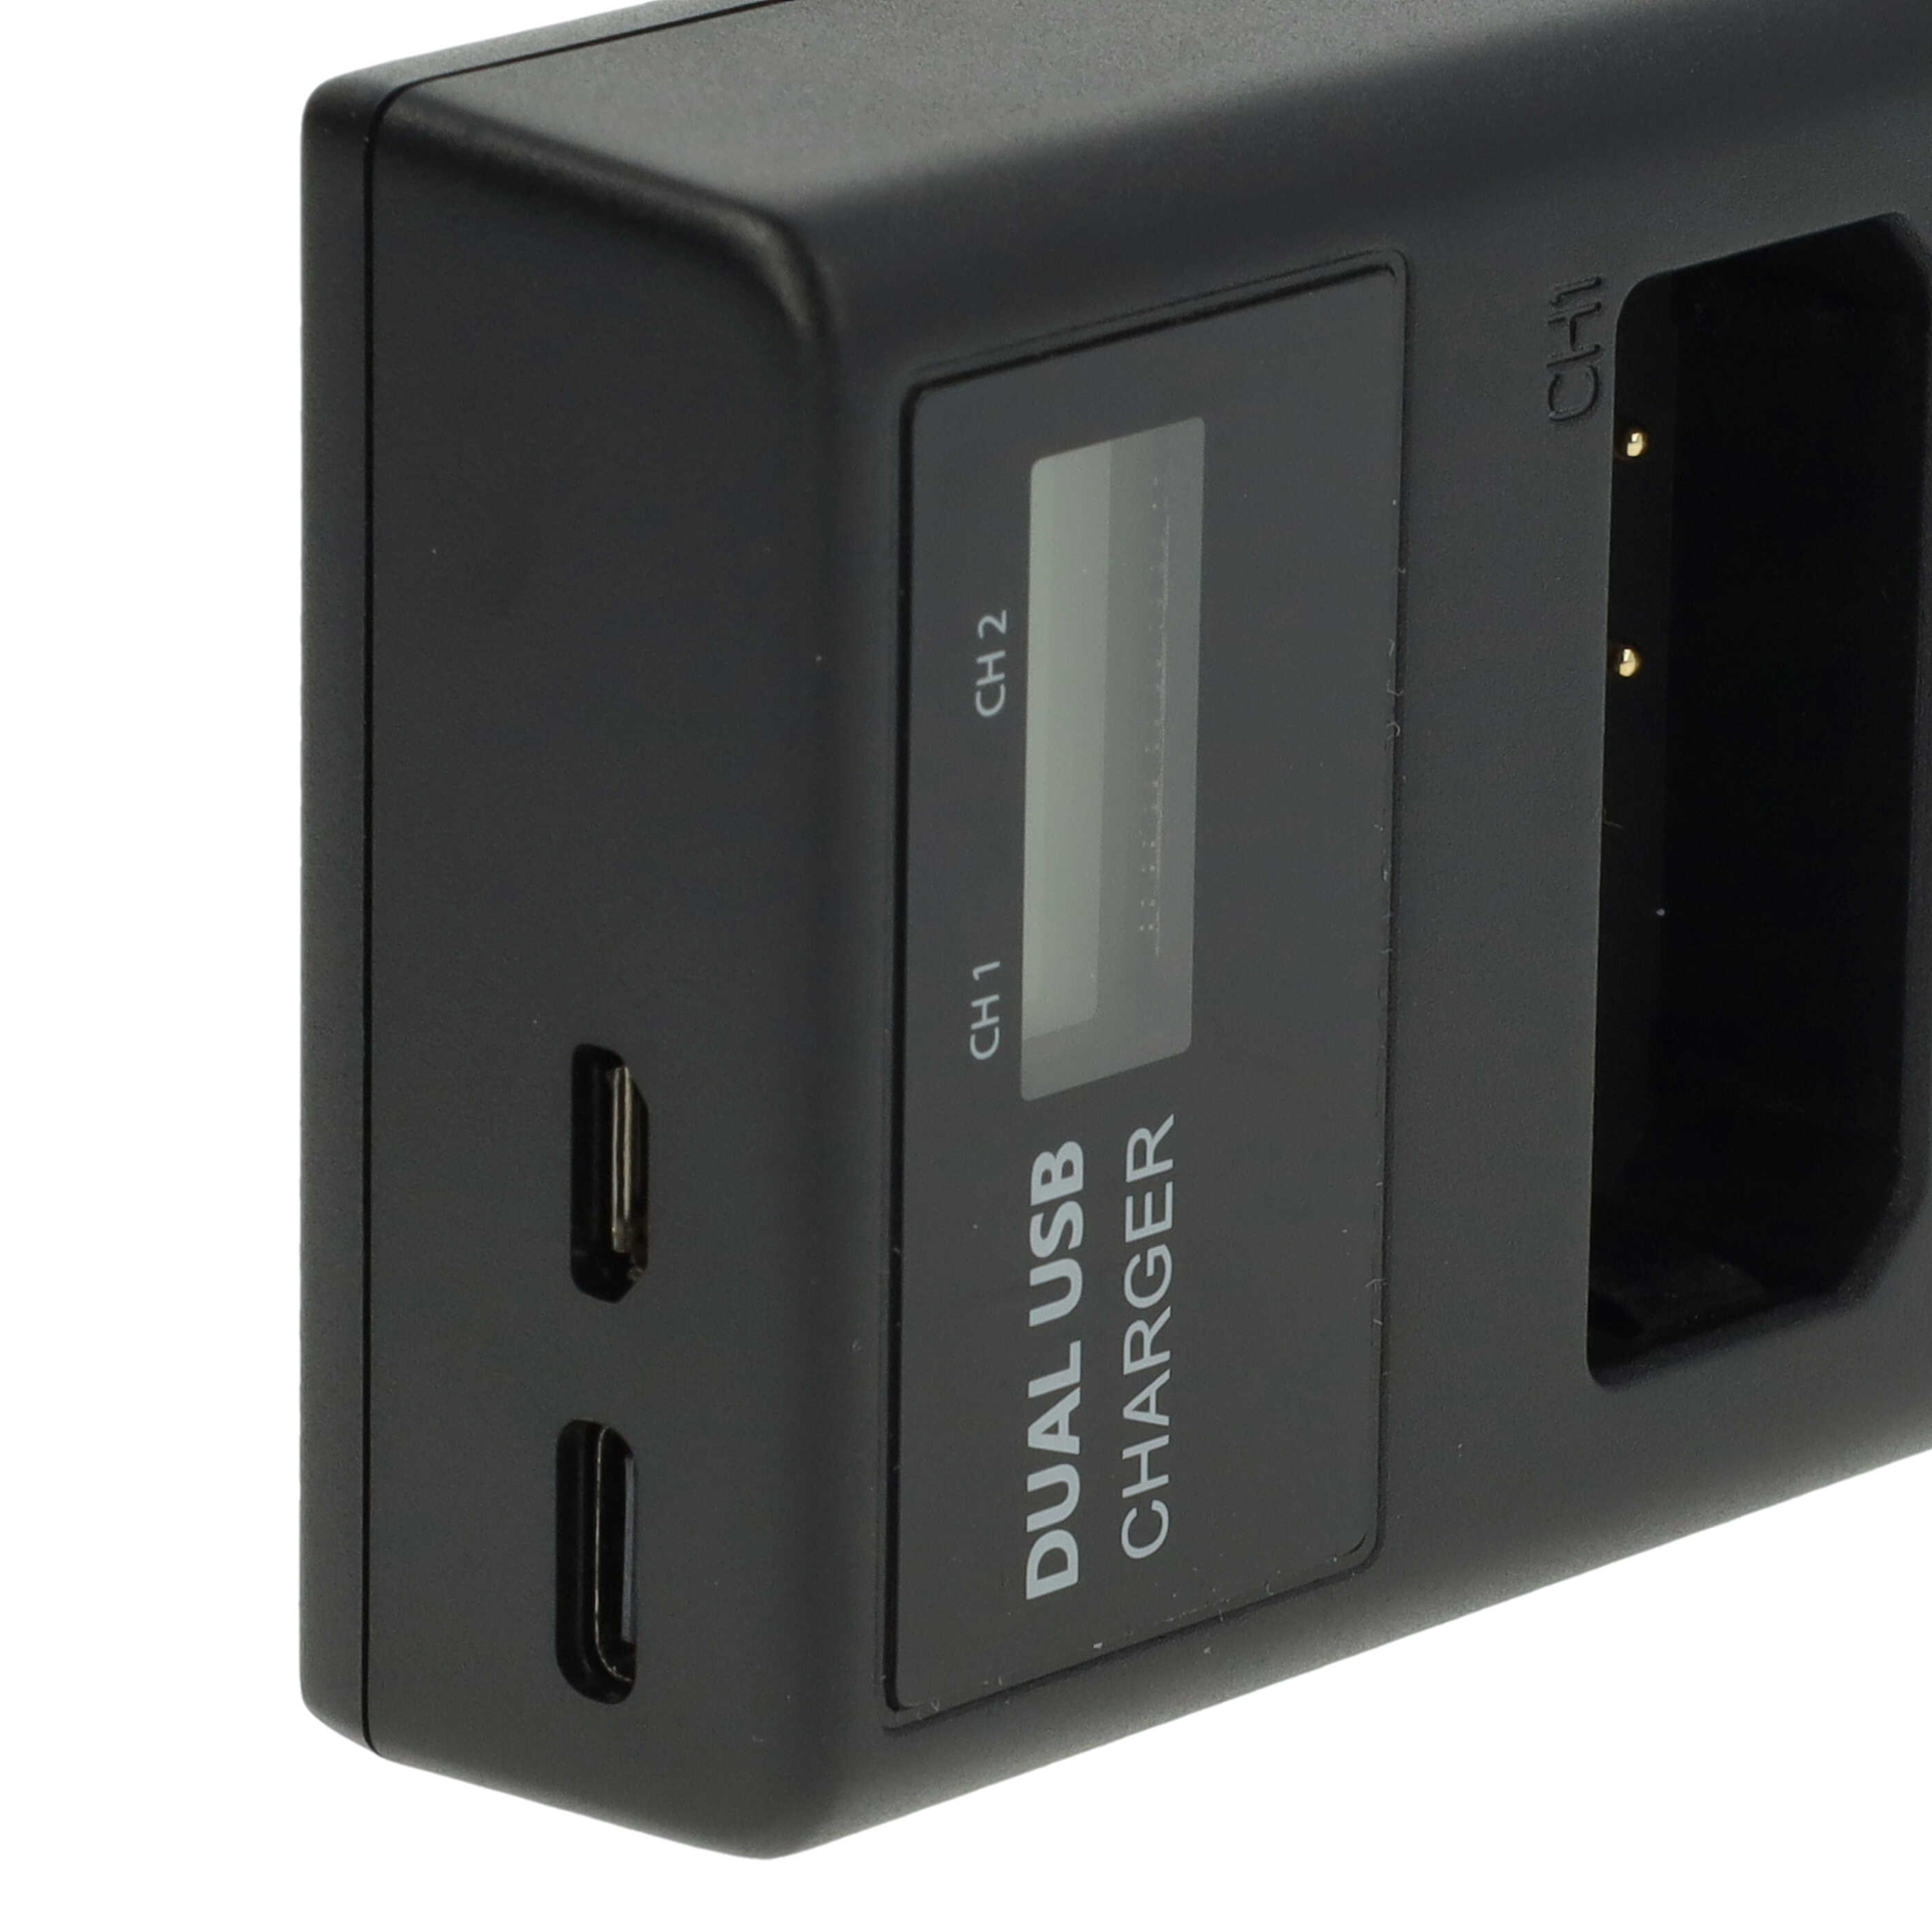 Battery Charger suitable for Canon LP-E10 Camera etc. - 0.5 A, 8.4 V